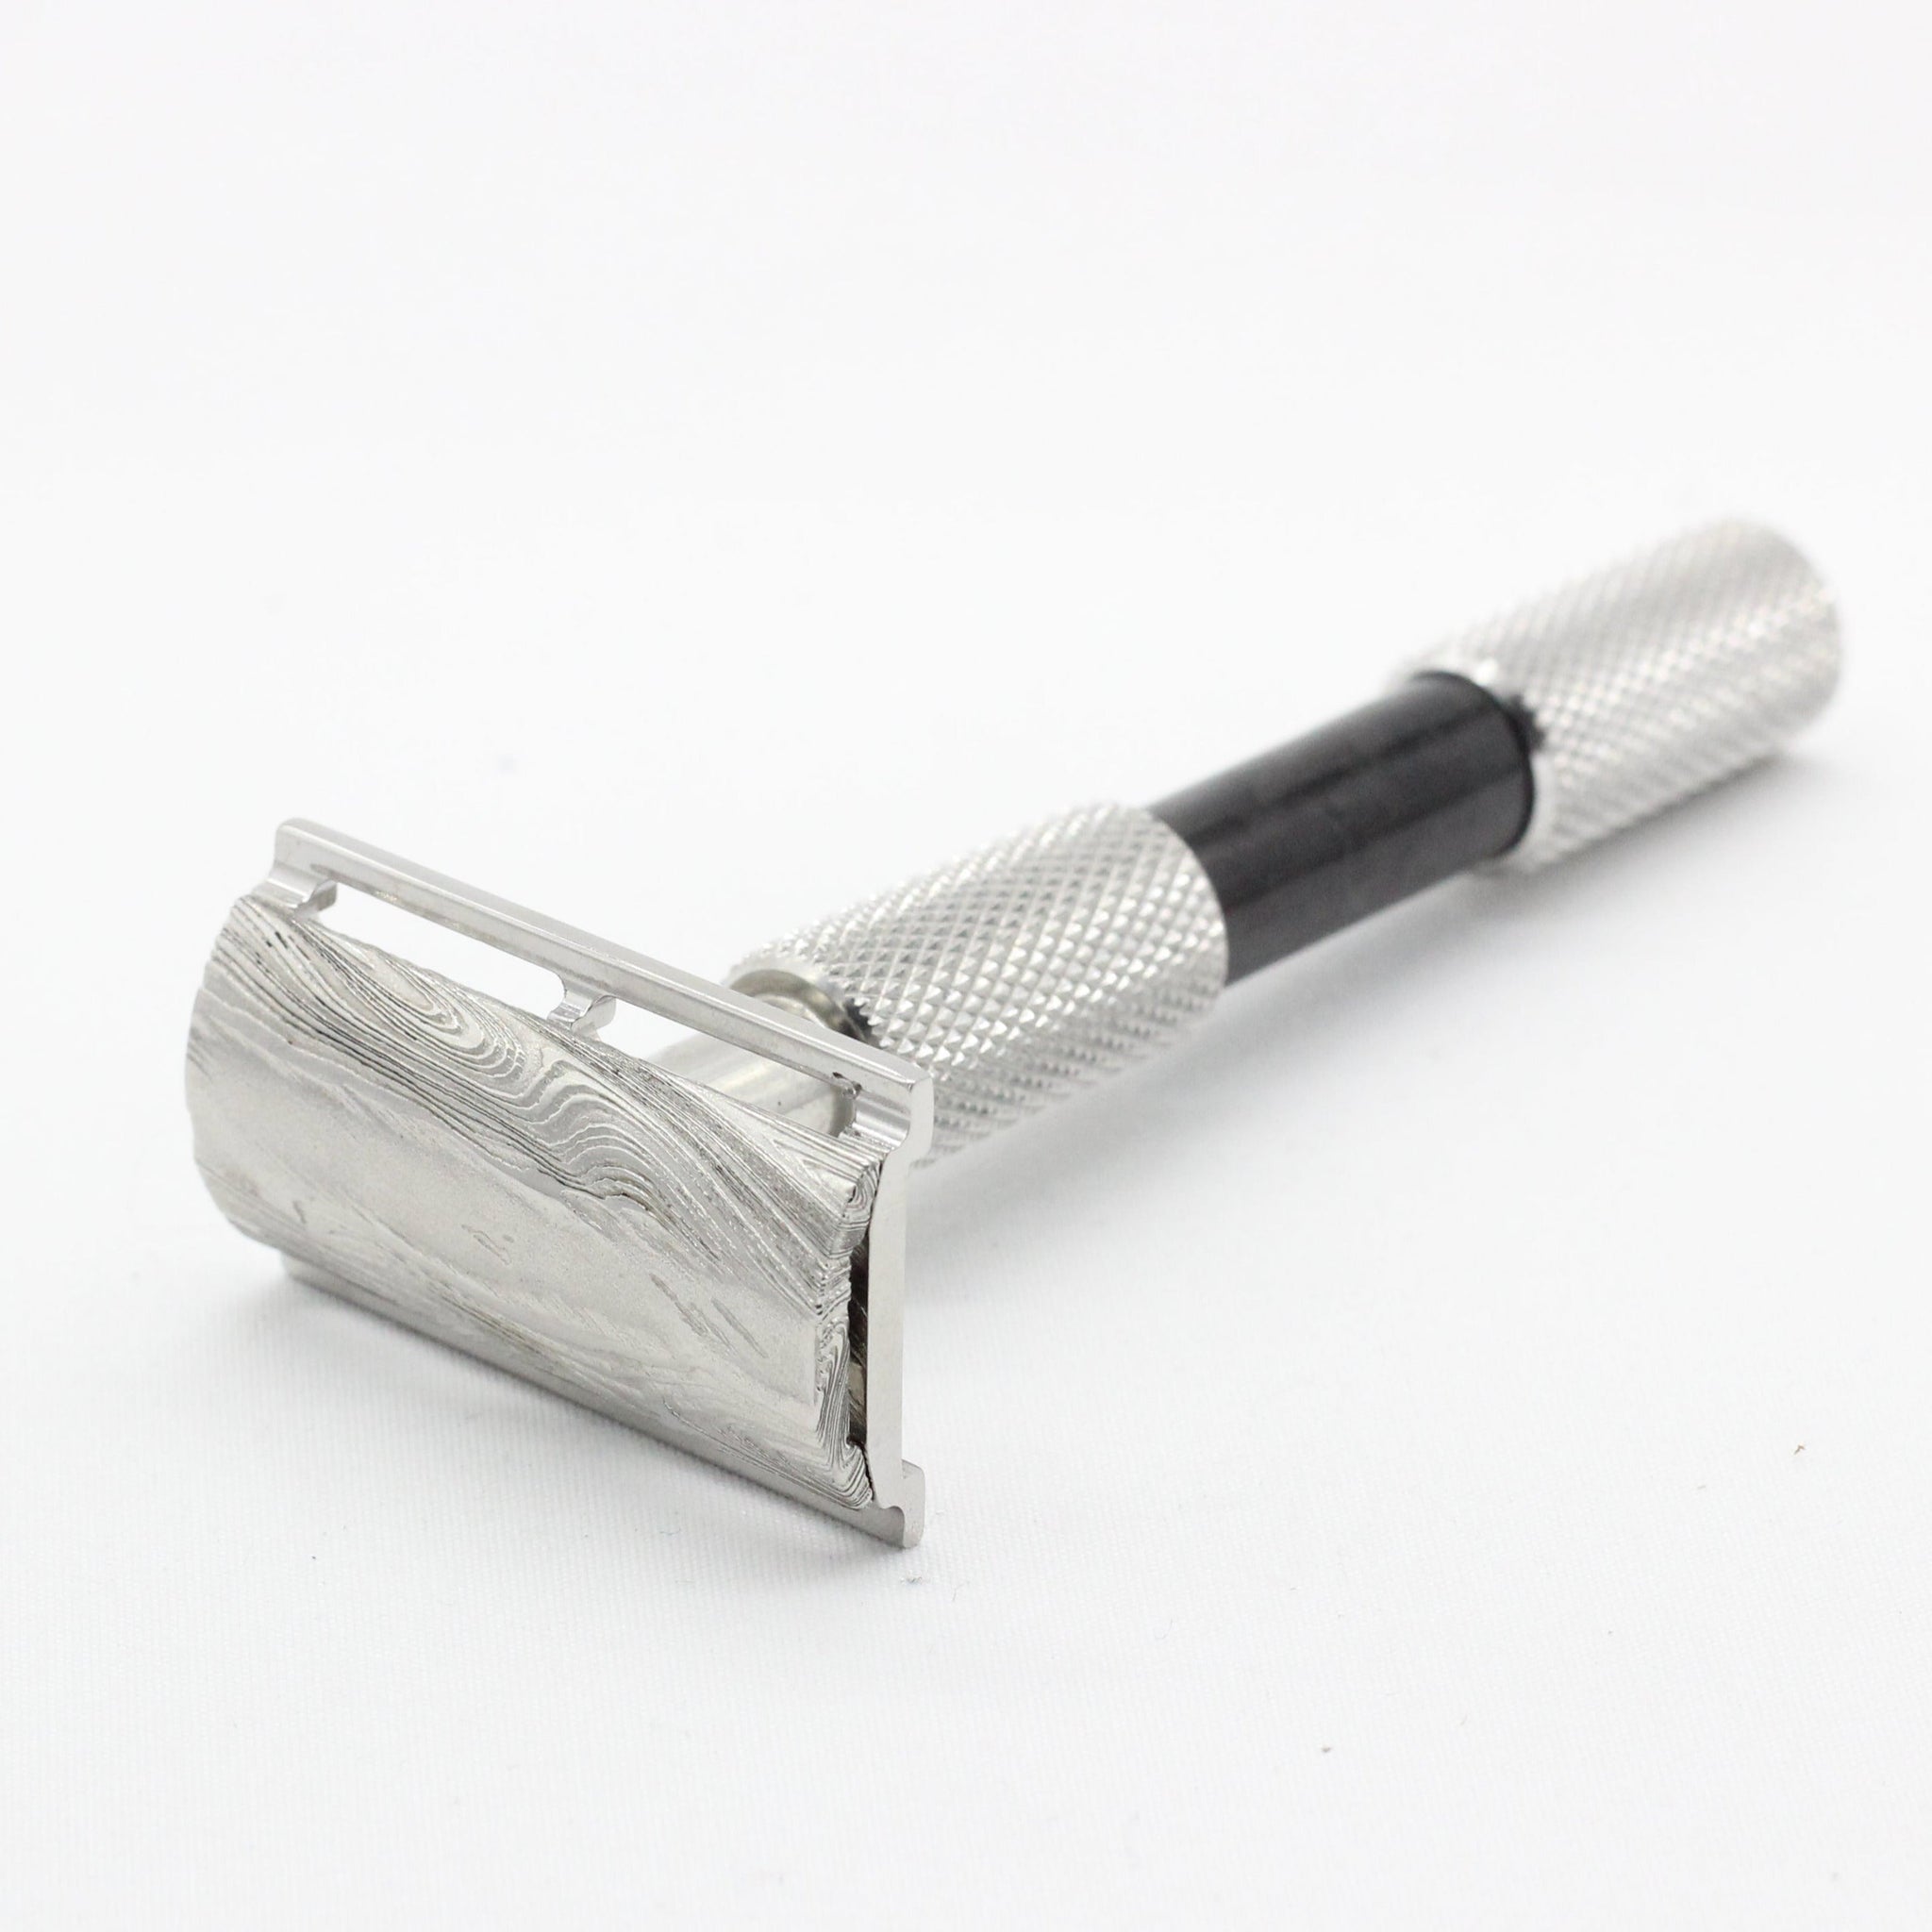 Top view - Stainless Damascus with twist pattern single edge razor a double edge safety razor for wet shaving polished grade 304 and 316 - For blade placement in shaving